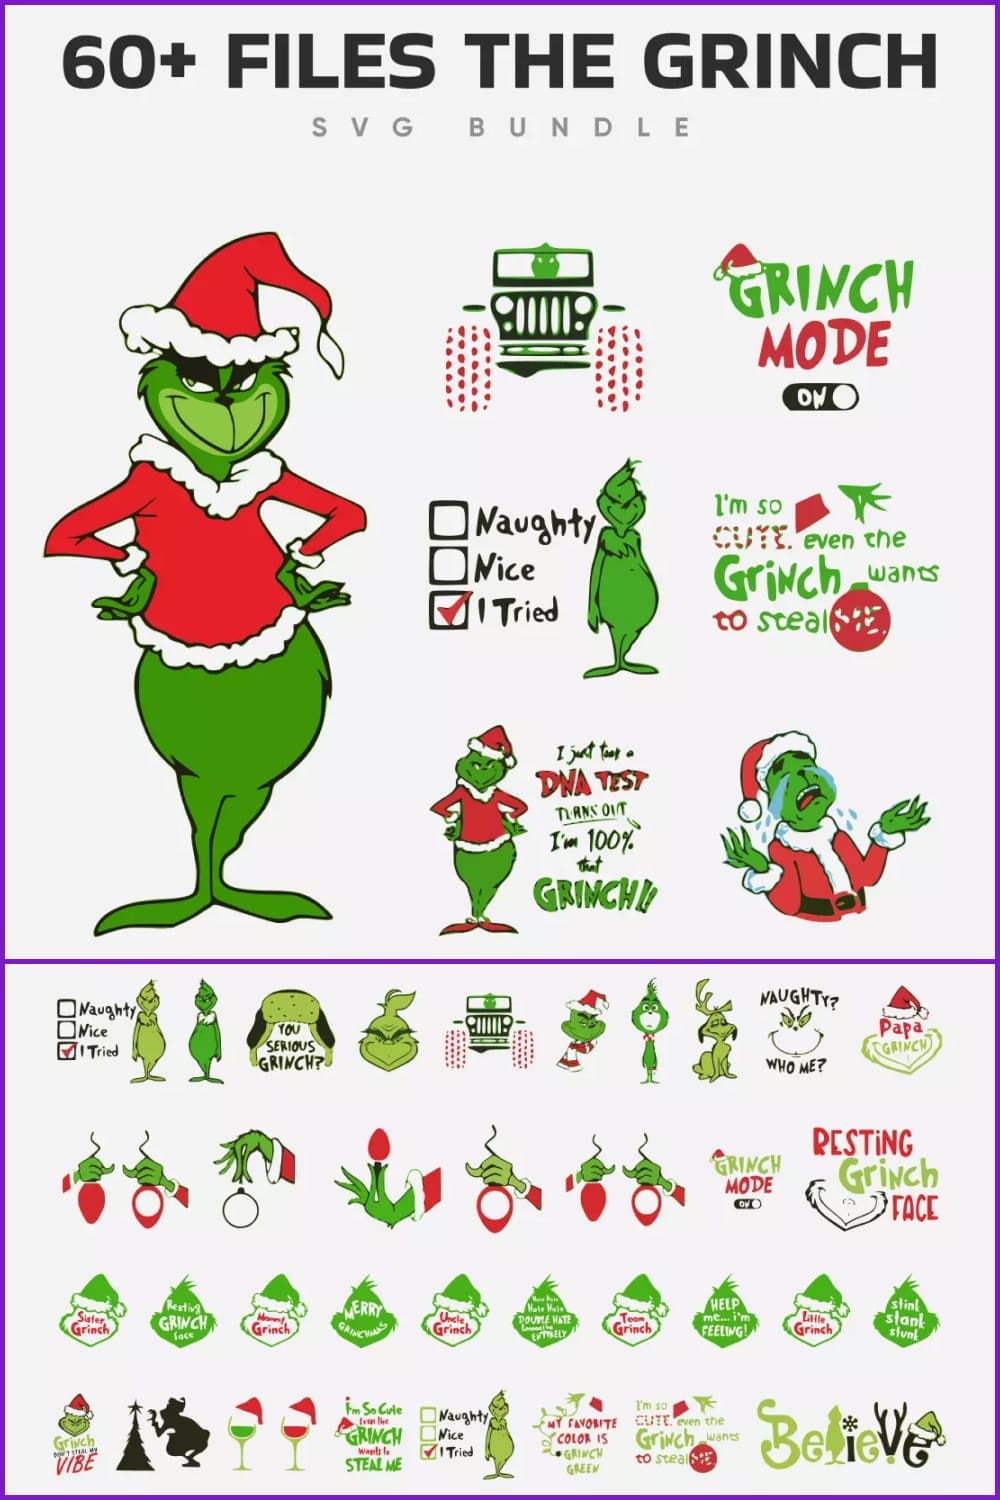 Grinch icons with funny signs.